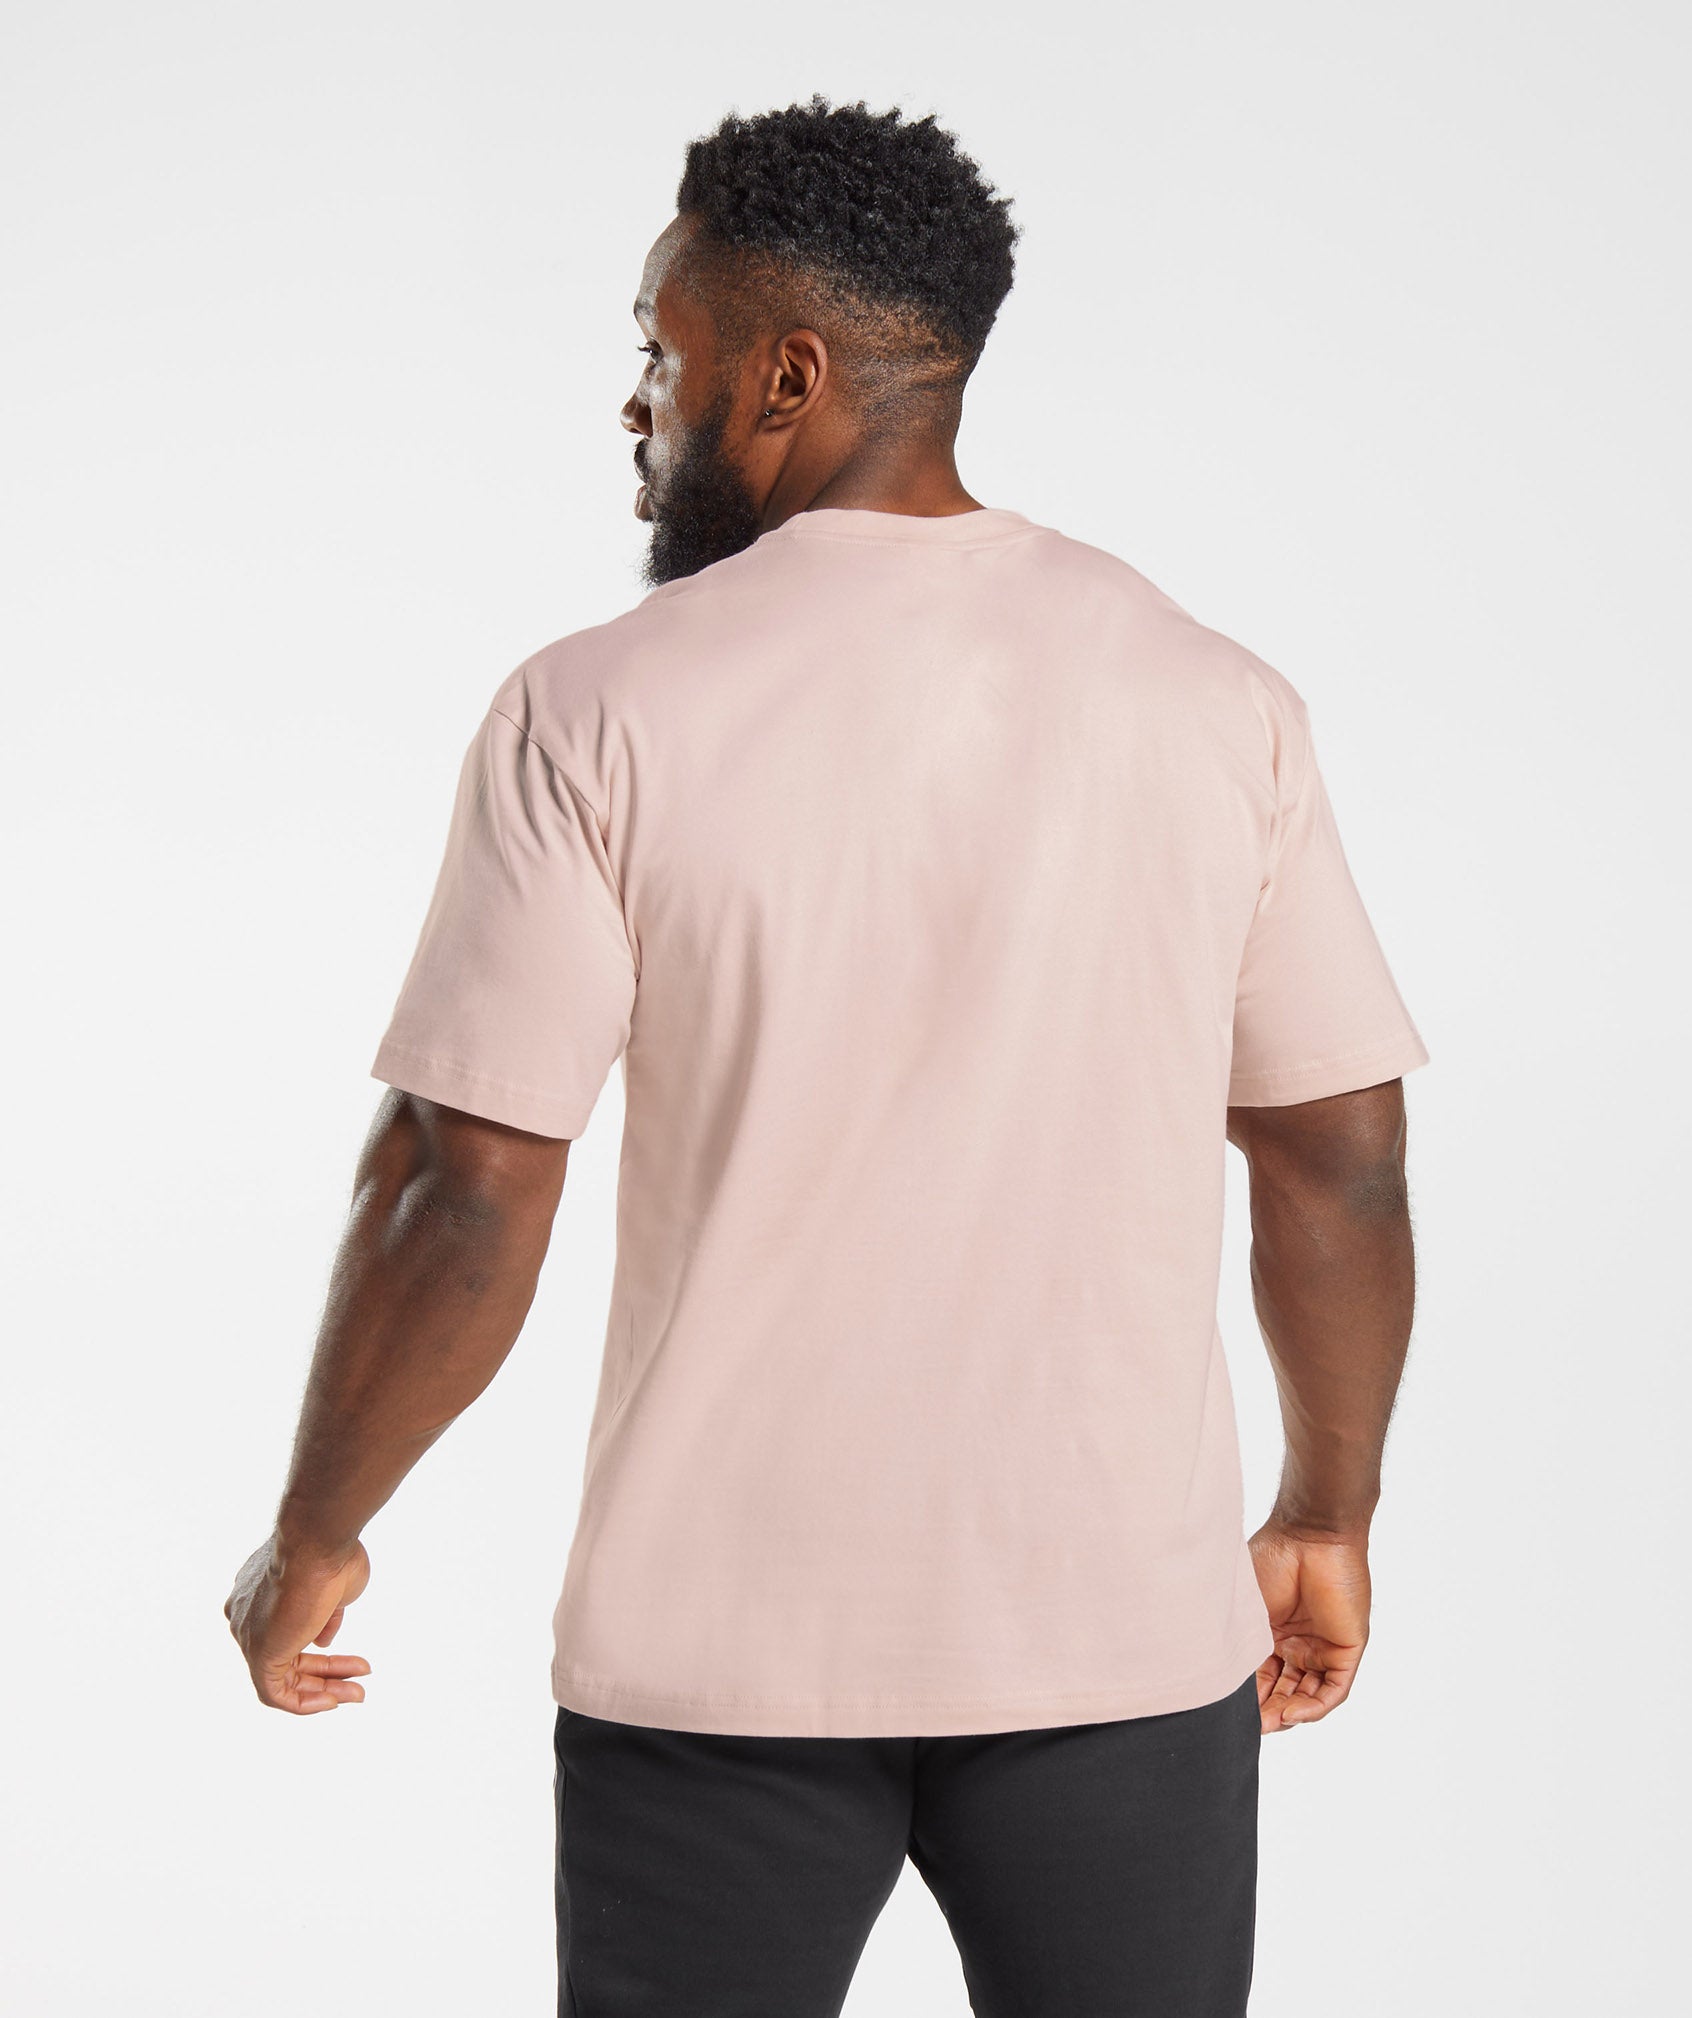 Apollo Oversized T-Shirt in Misty Pink - view 2